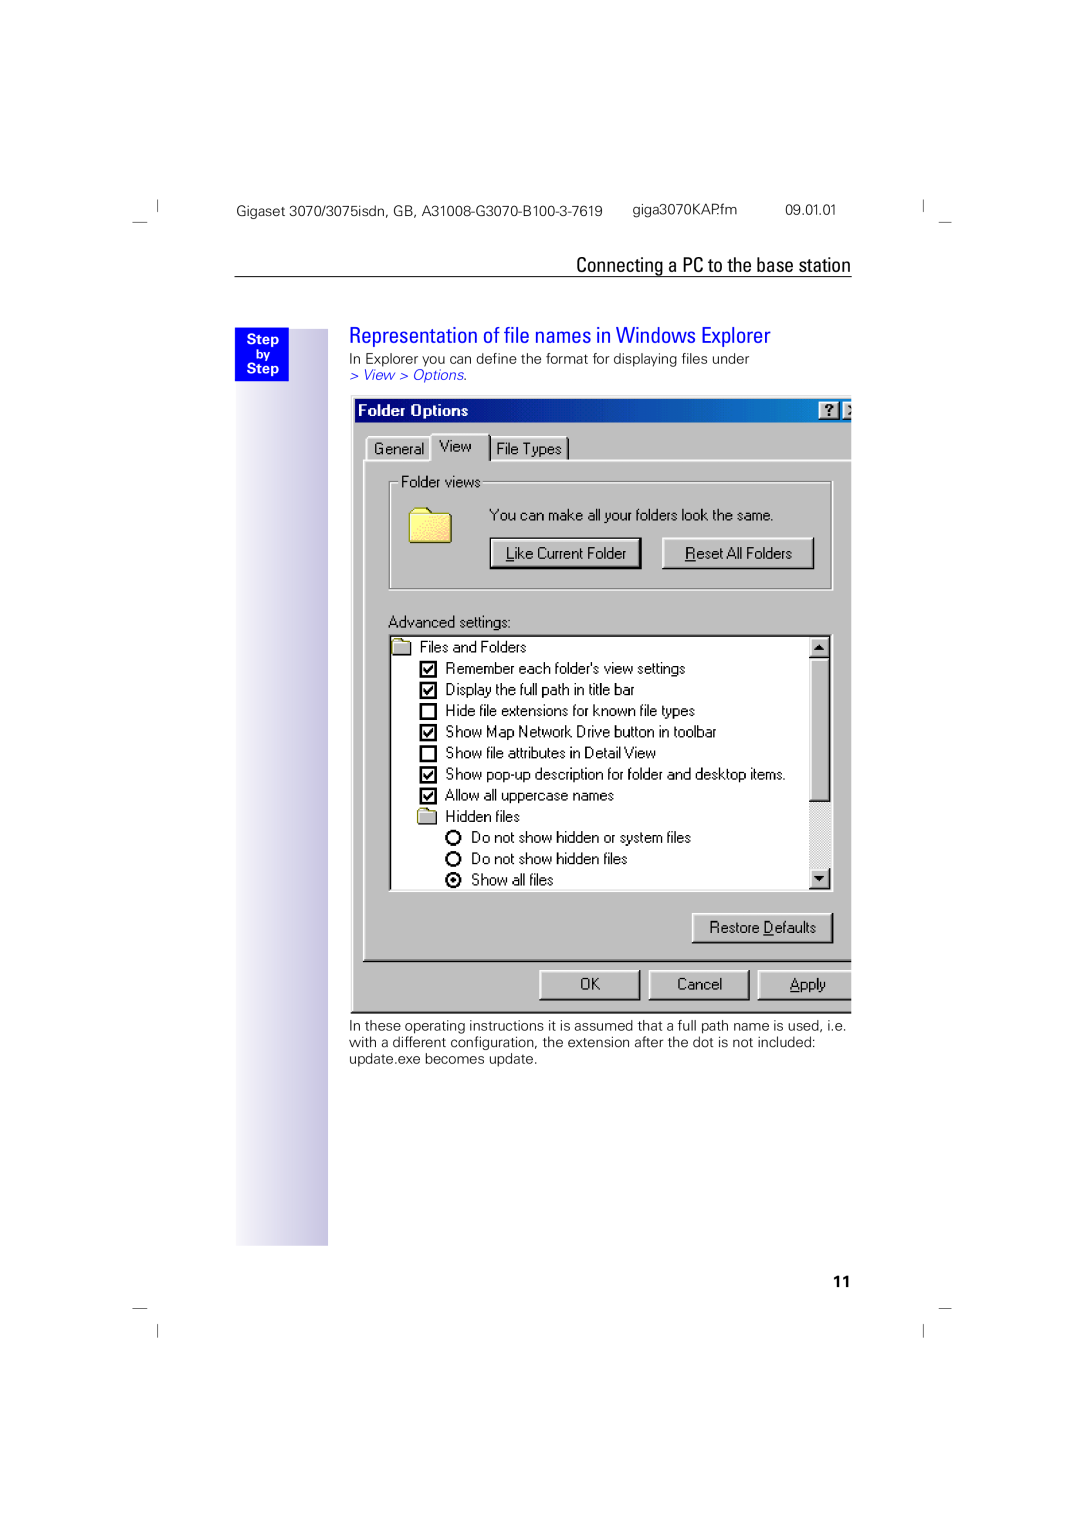 Siemens 75, 3070 manual Representation of file names in Windows Explorer, Connecting a PC to the base station, Step 